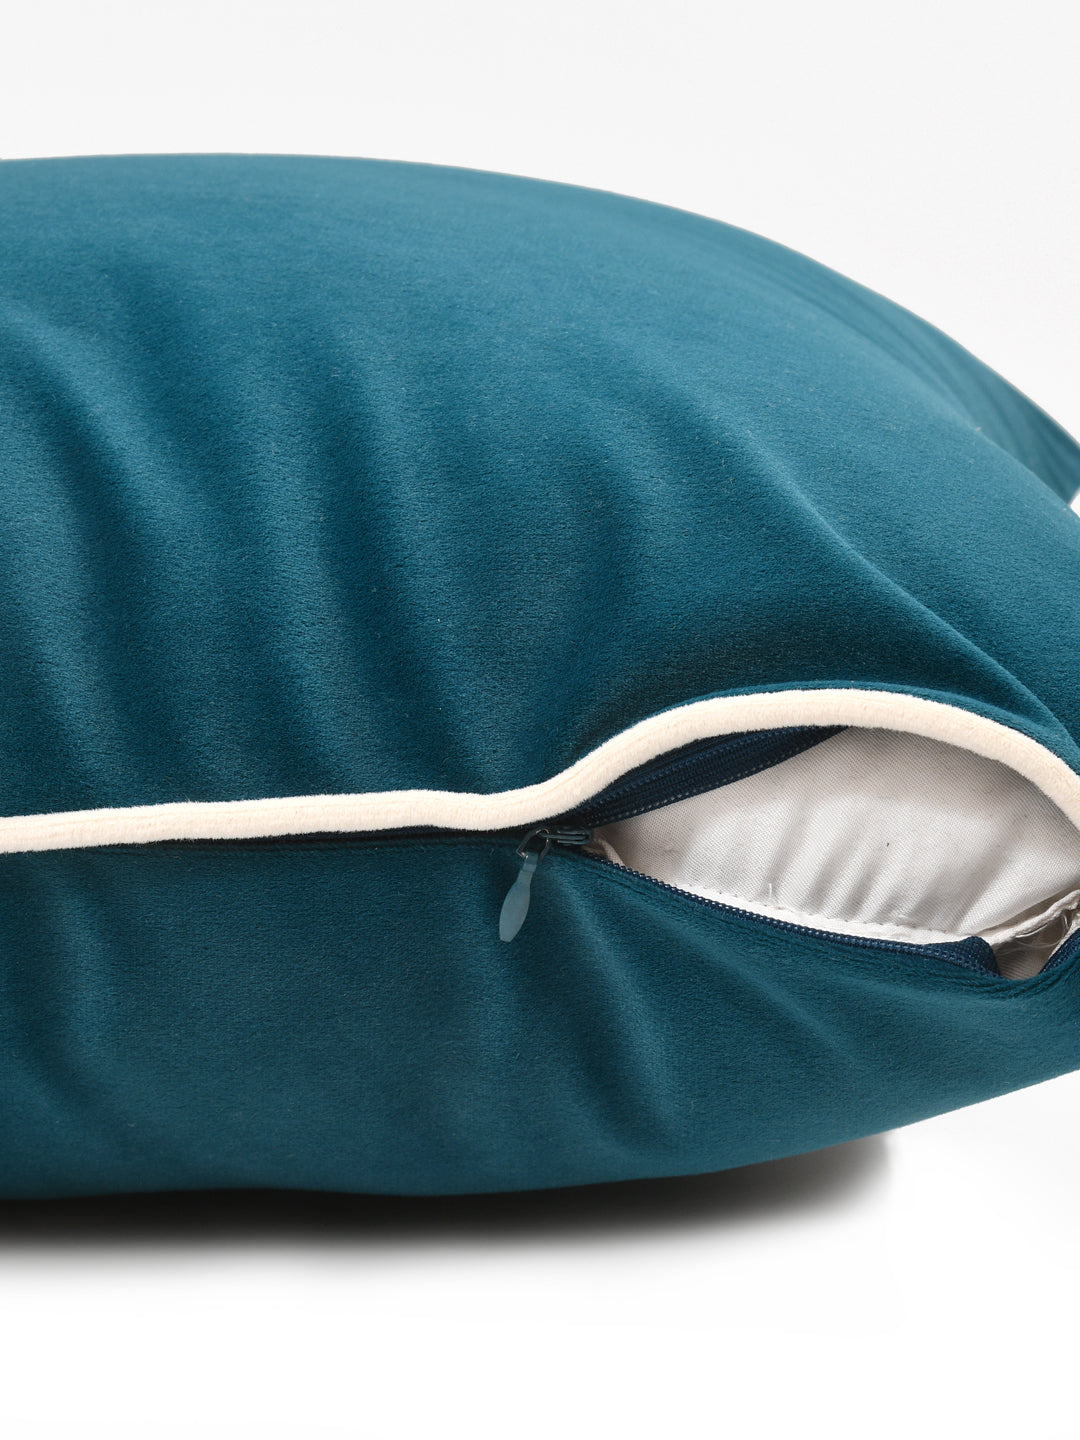 Velvet Cushion Covers; Set of 5; Teal With White Piping